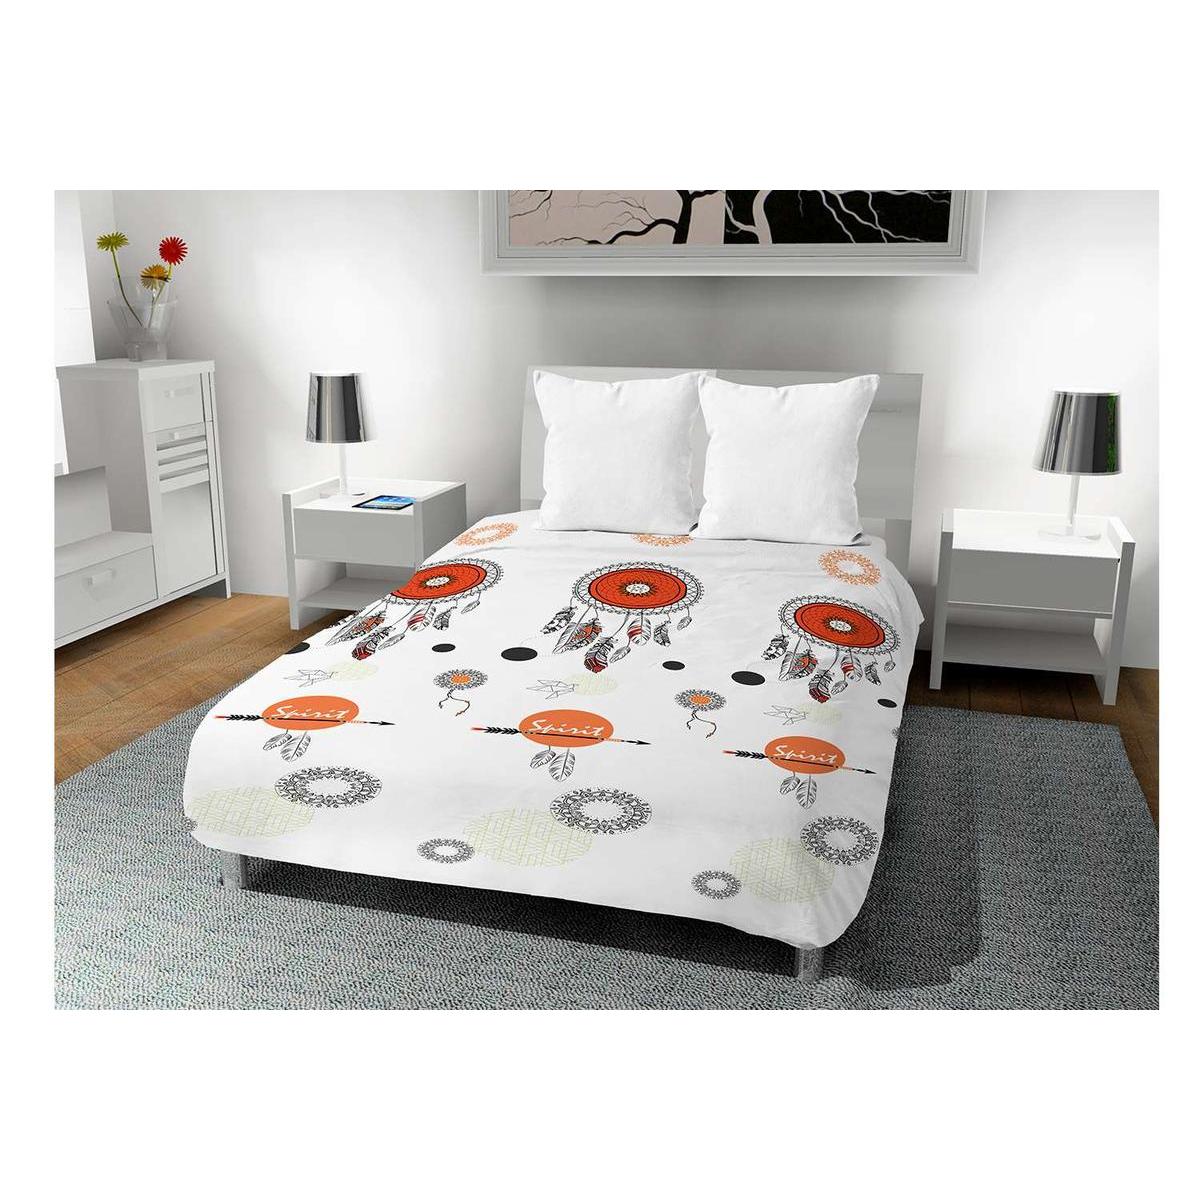 DODO Couette Extra Douce - Confort Hotel TEMPEREE pas cher 